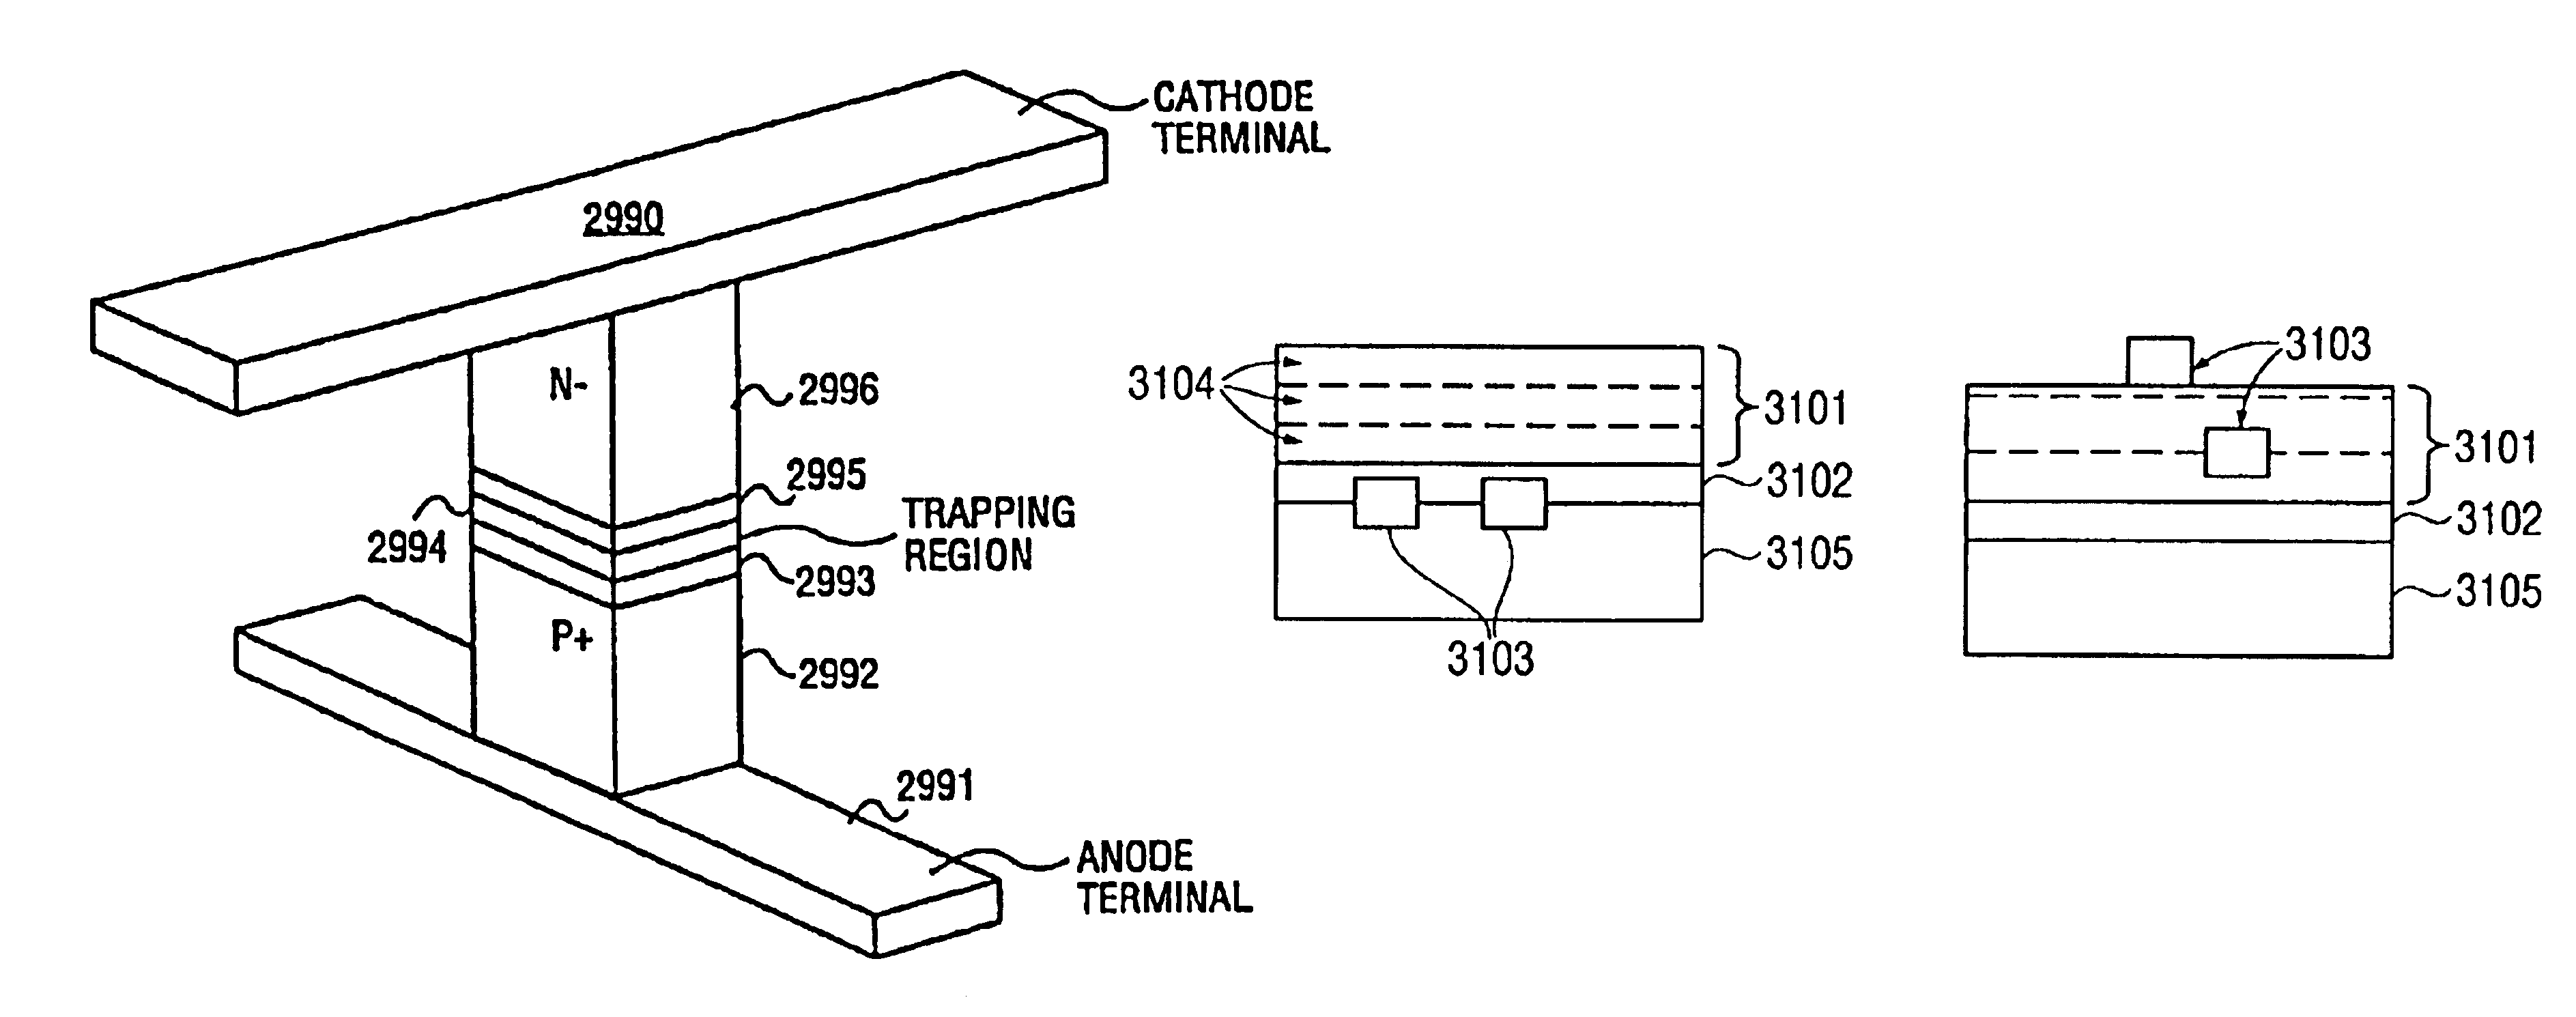 Monolithic three dimensional array of charge storage devices containing a planarized surface